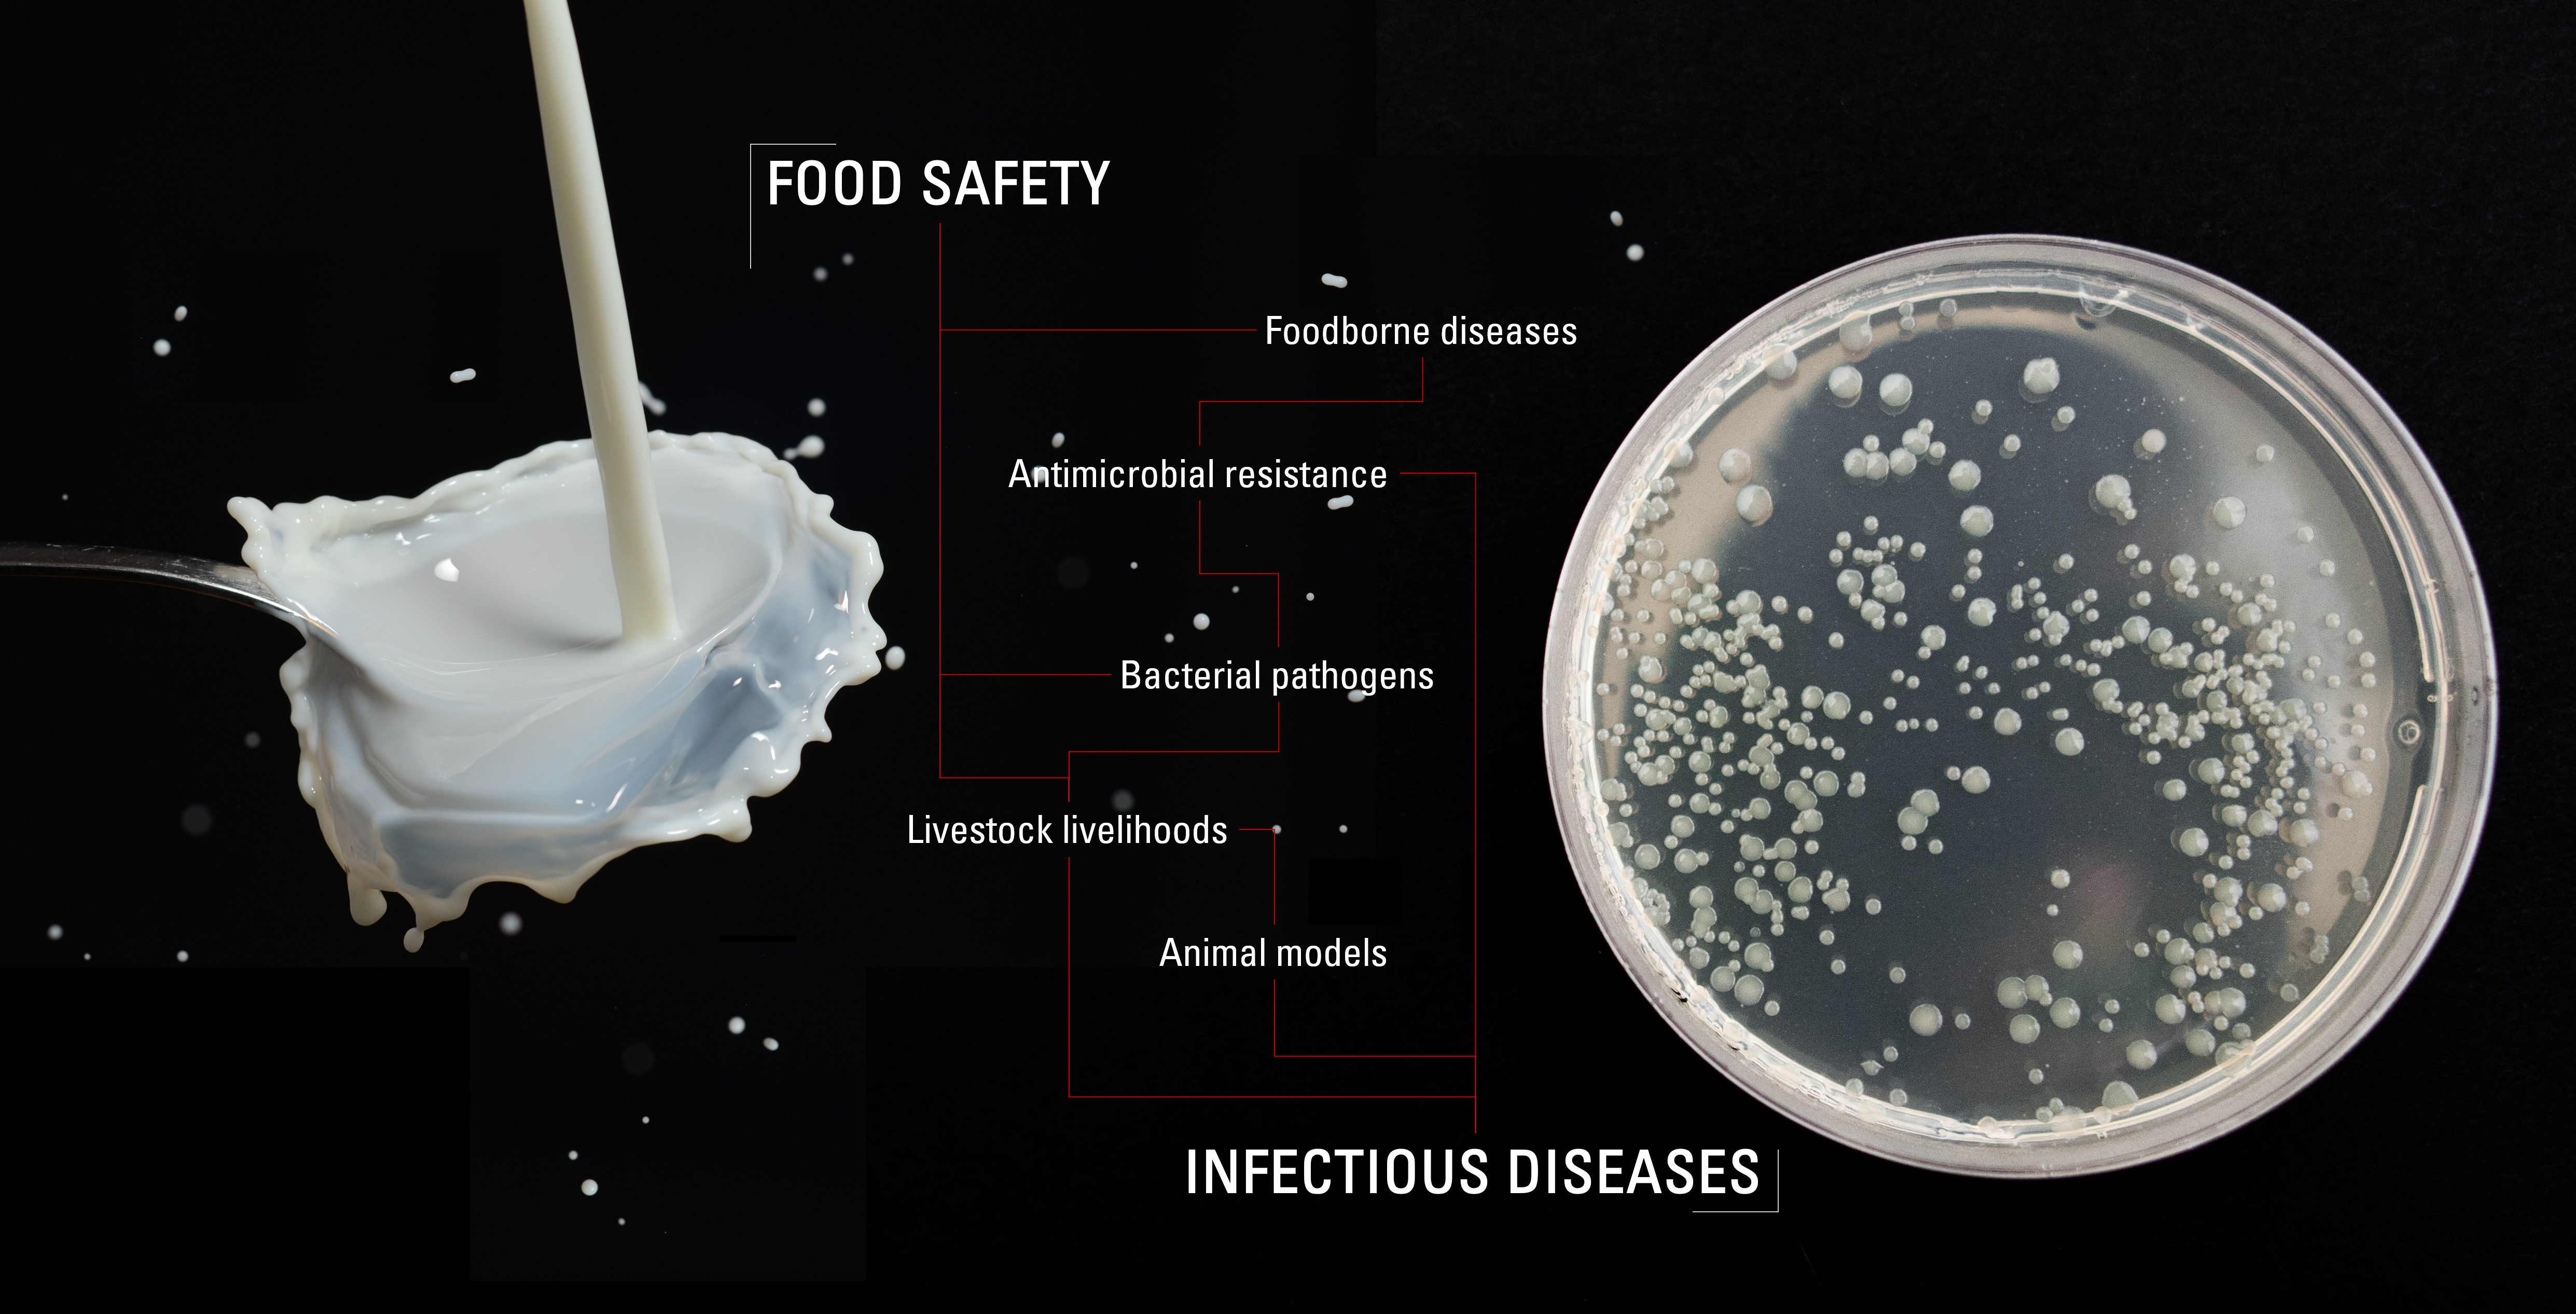 Milk and bacterial culture on black background. Text: Food Safety and Infectious Diseases linked to antimicrobial resistance, foodborne diseases, bacterial pathogens, animal models and livestock livelihoods.